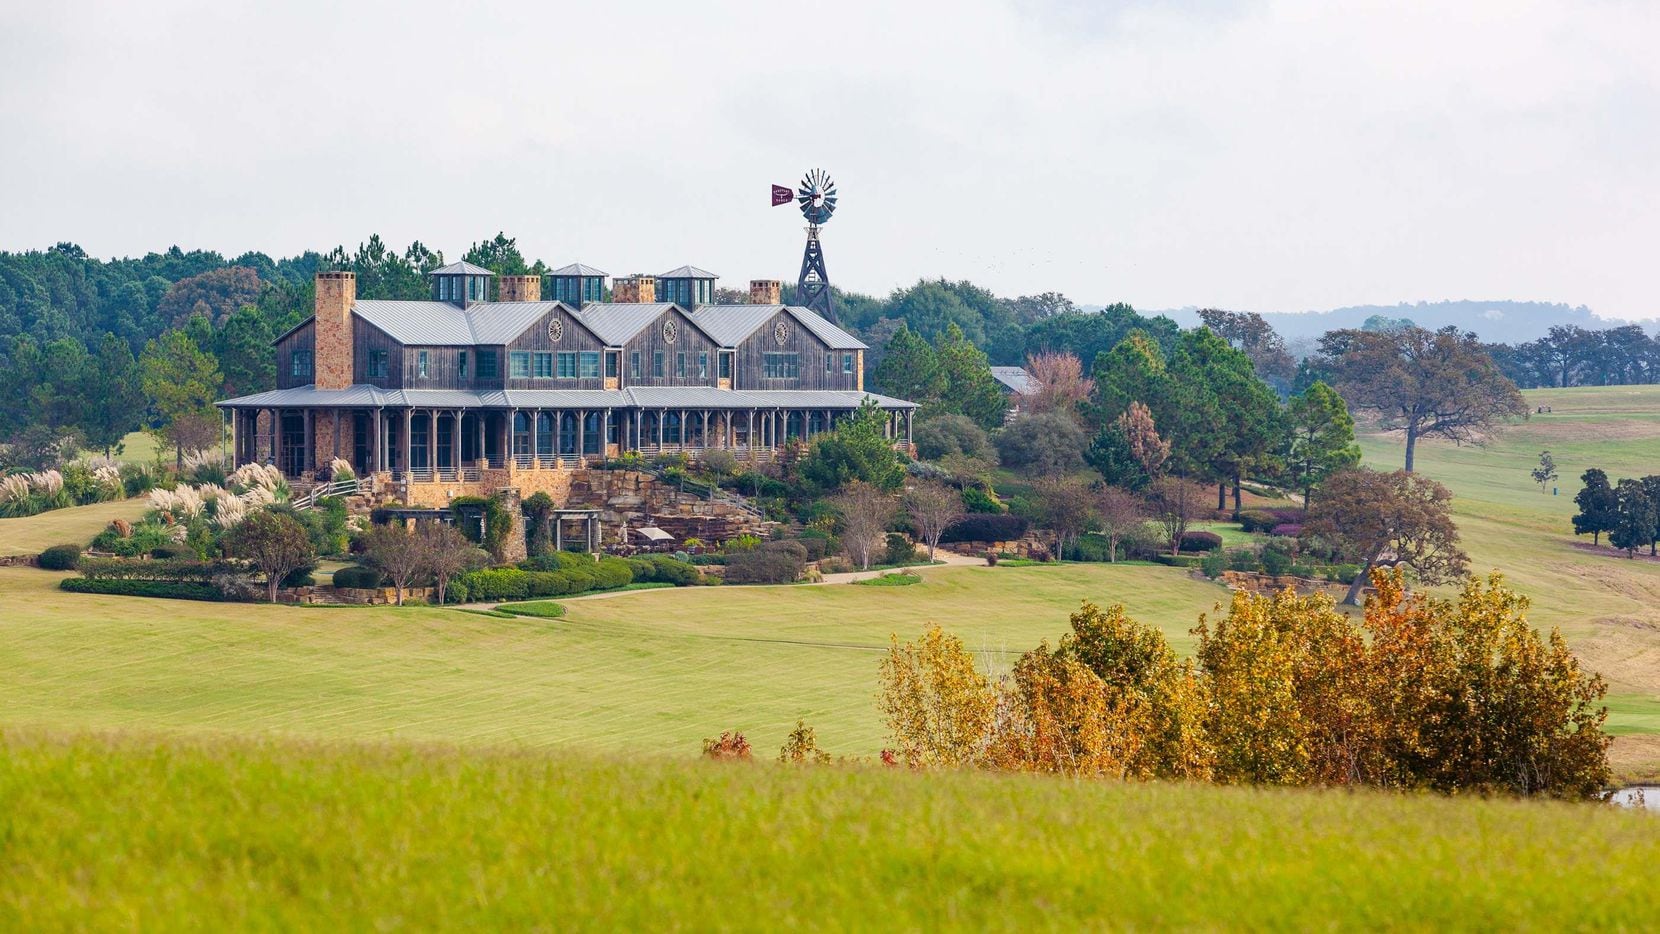 Barefoot Ranch is about an hour and 10 minutes southeast of Dallas.